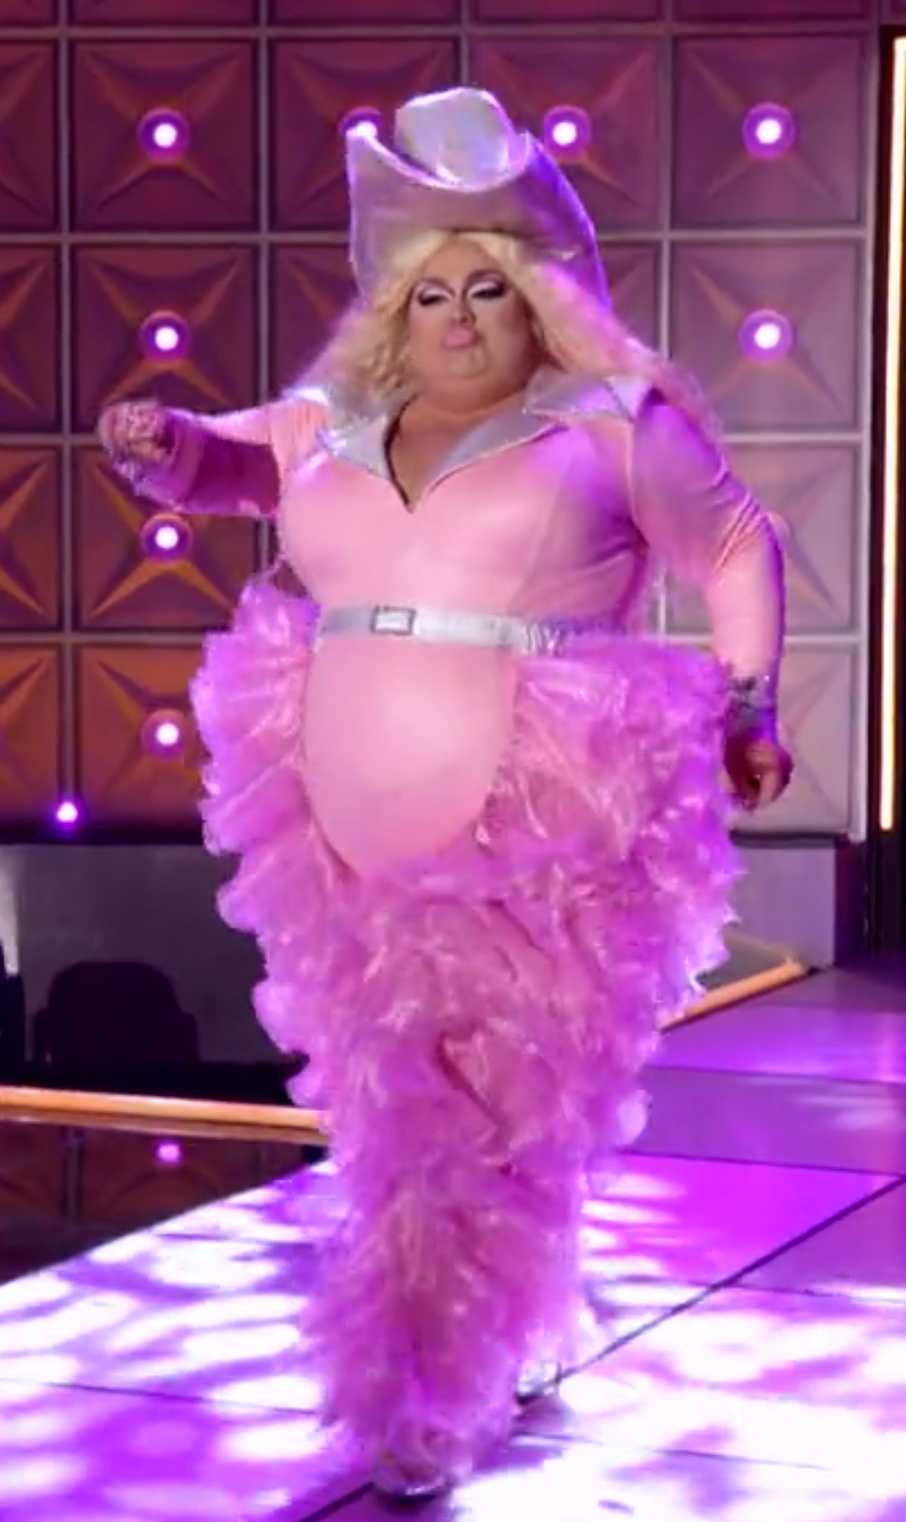 Eureka's Frill of It All look.